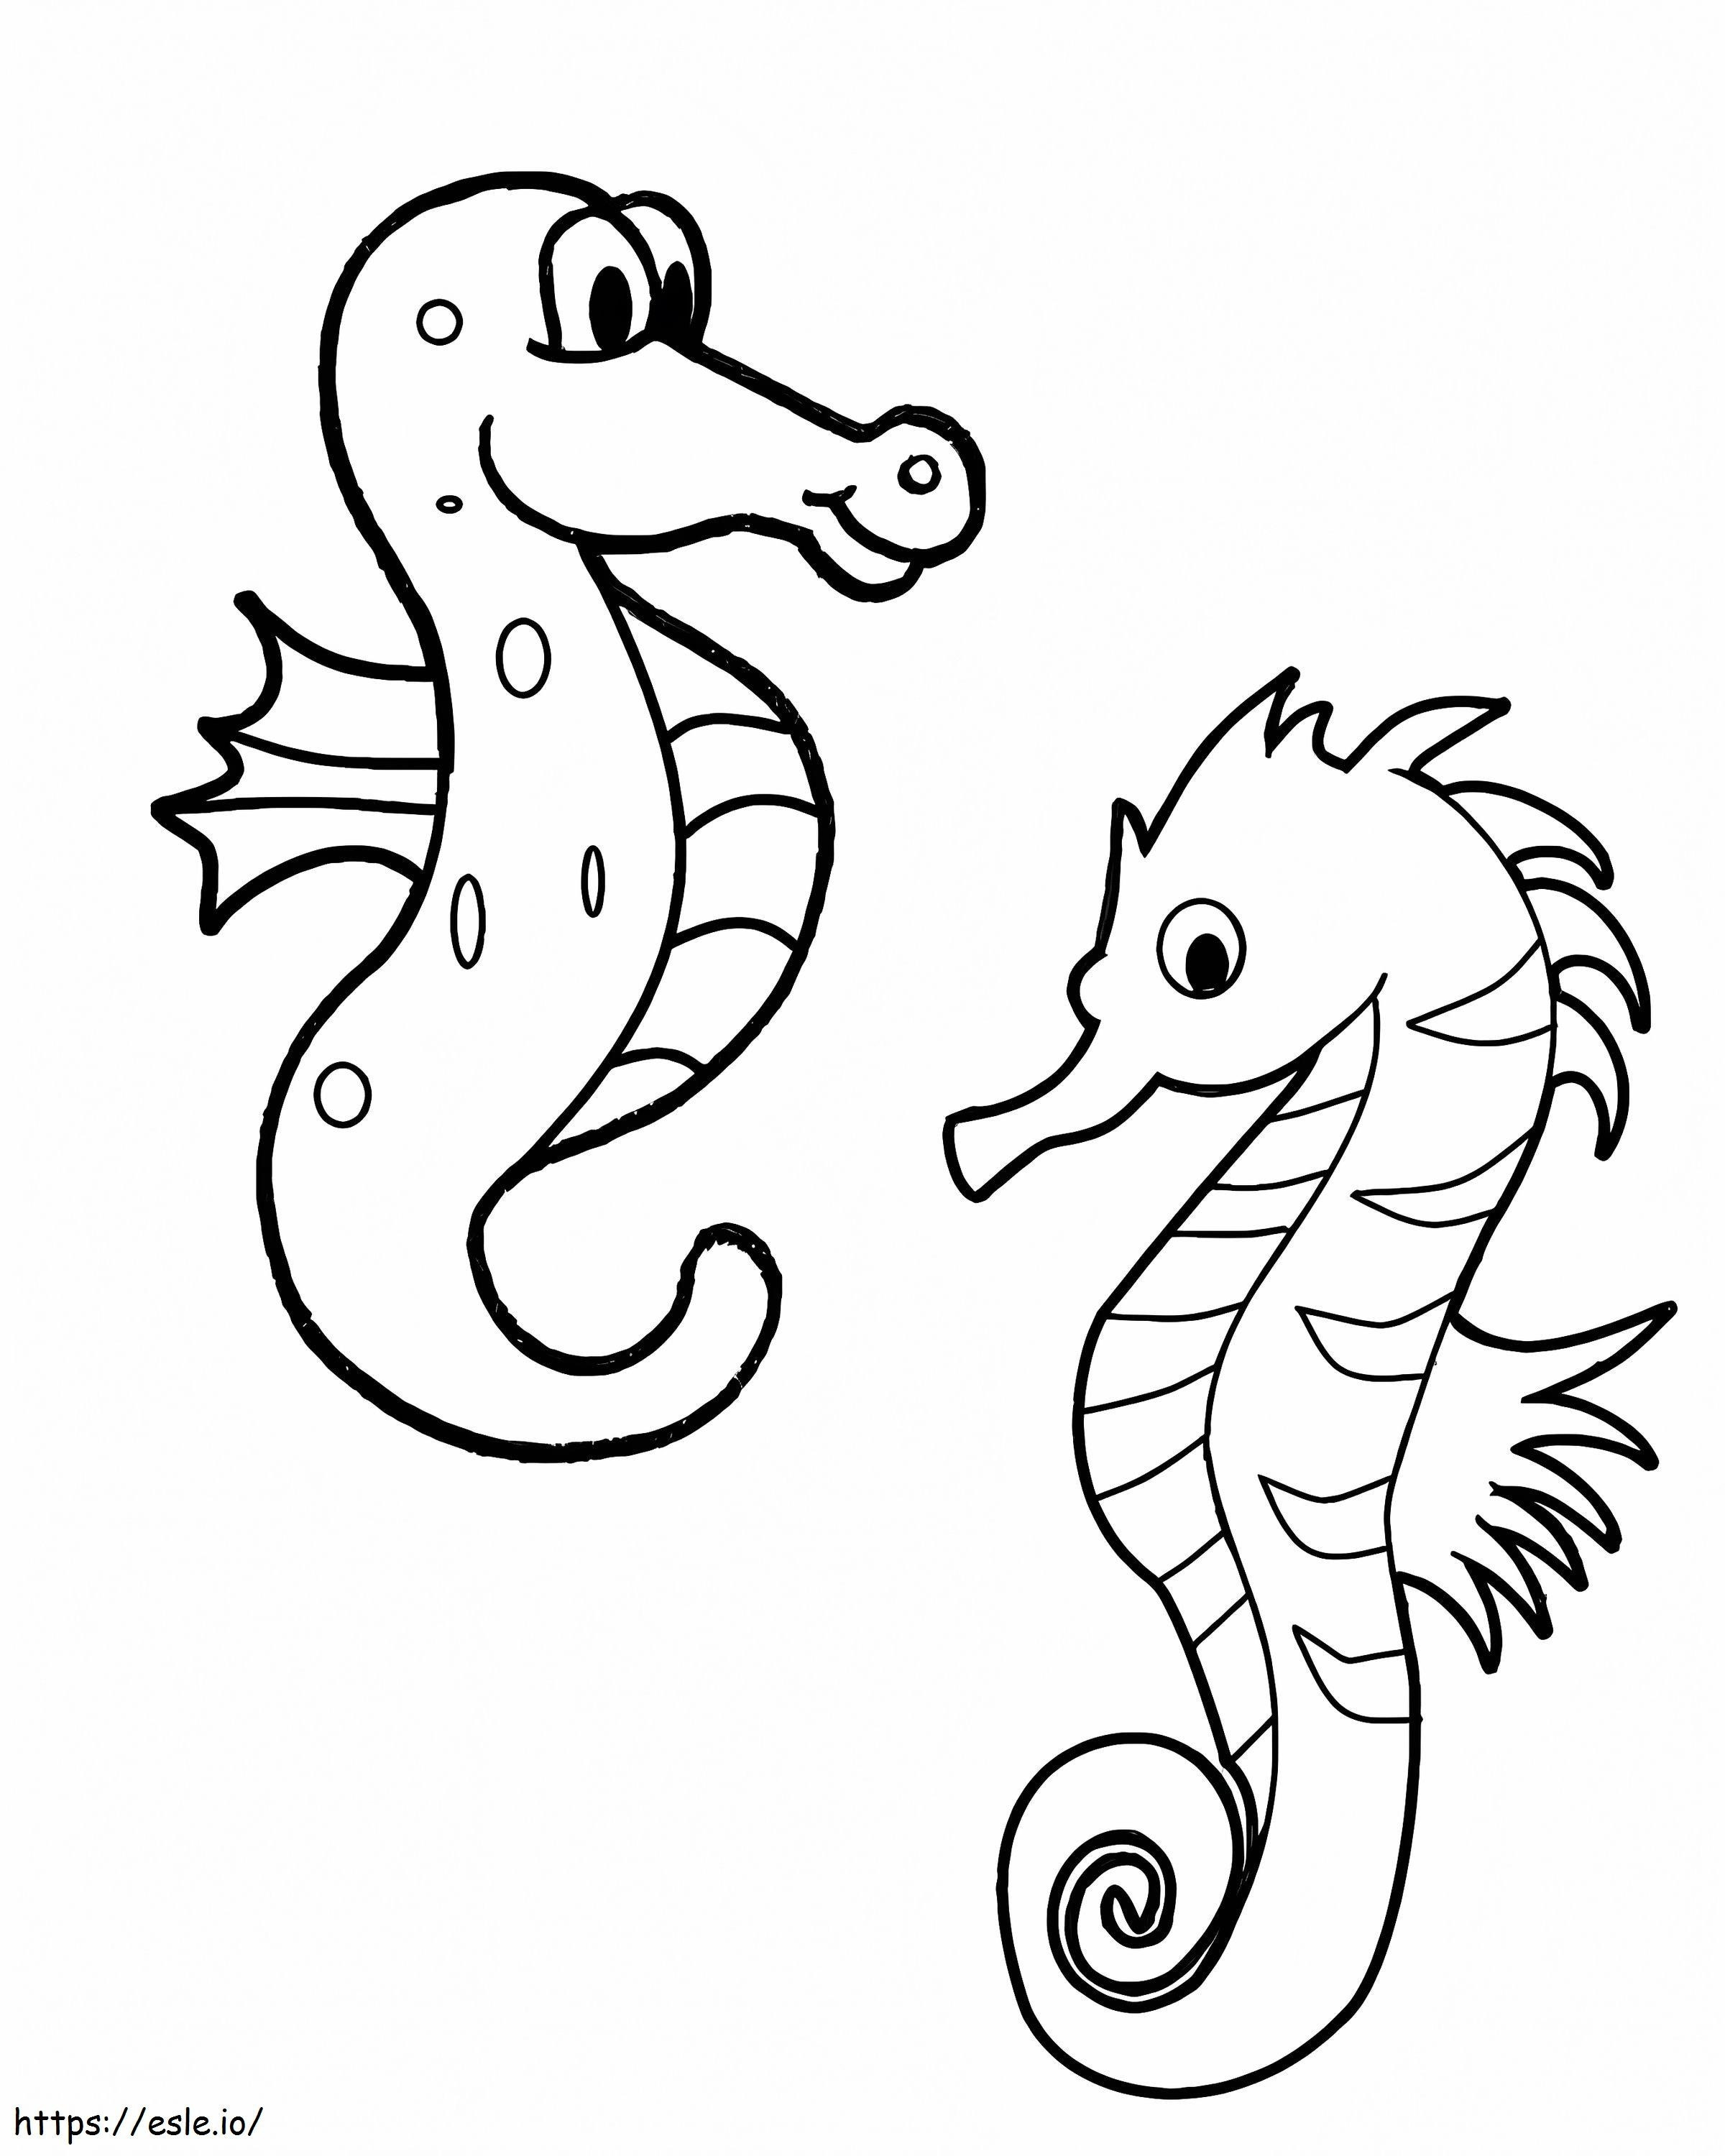 Two Funny Seahorses coloring page